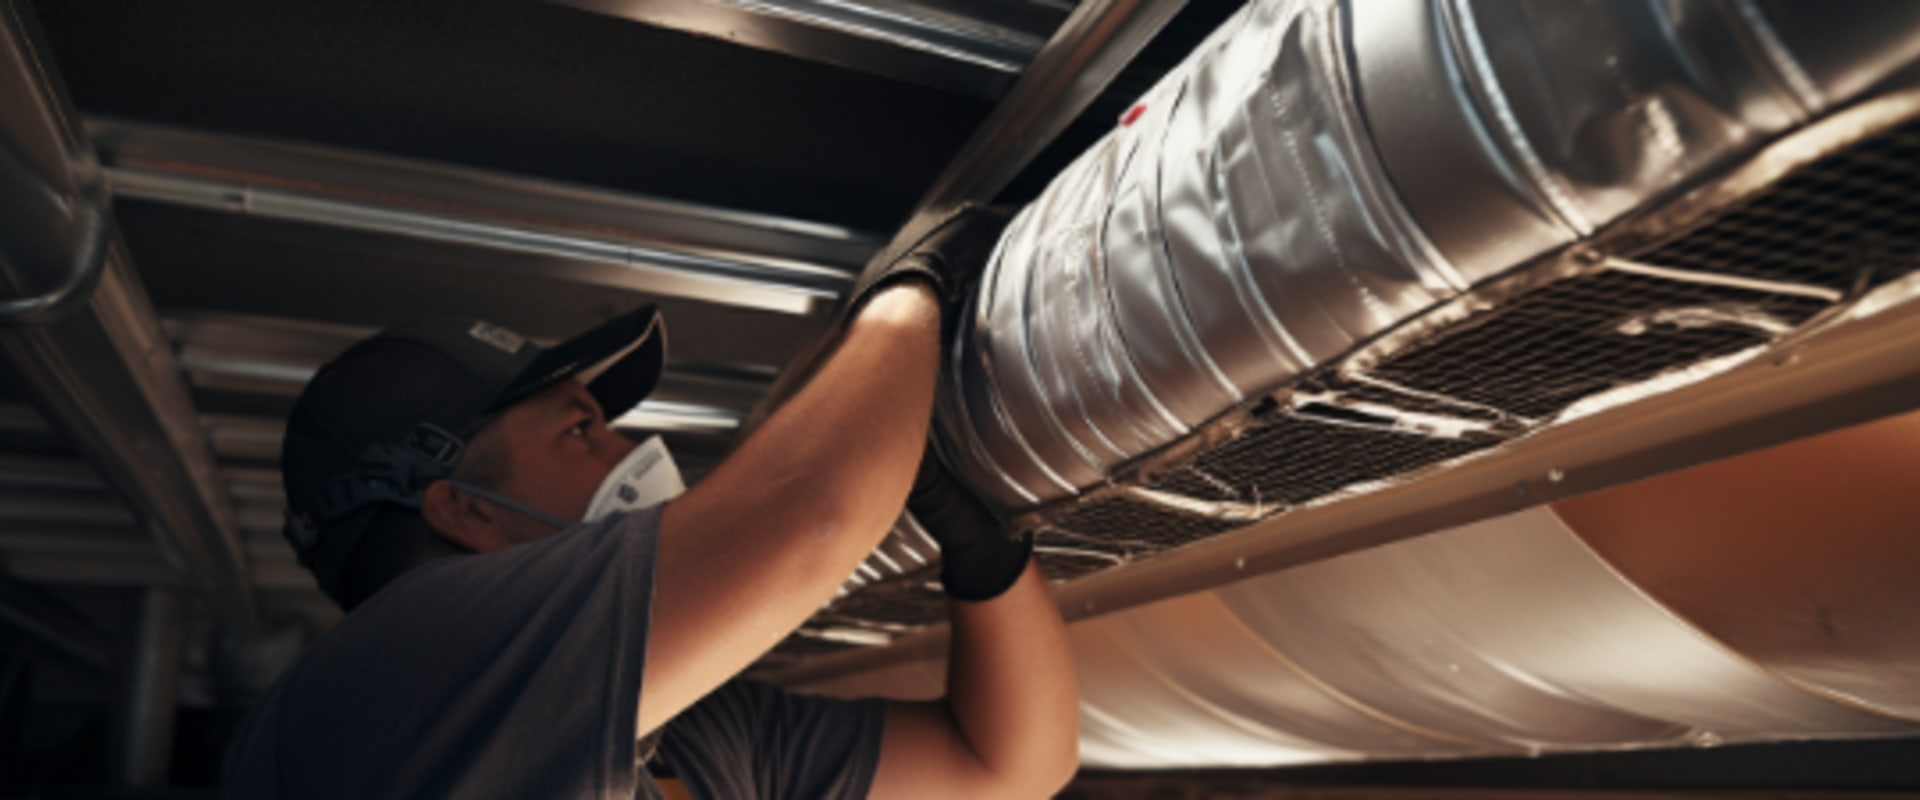 Duct Sealing Service for Lower Energy Costs in Kendall FL